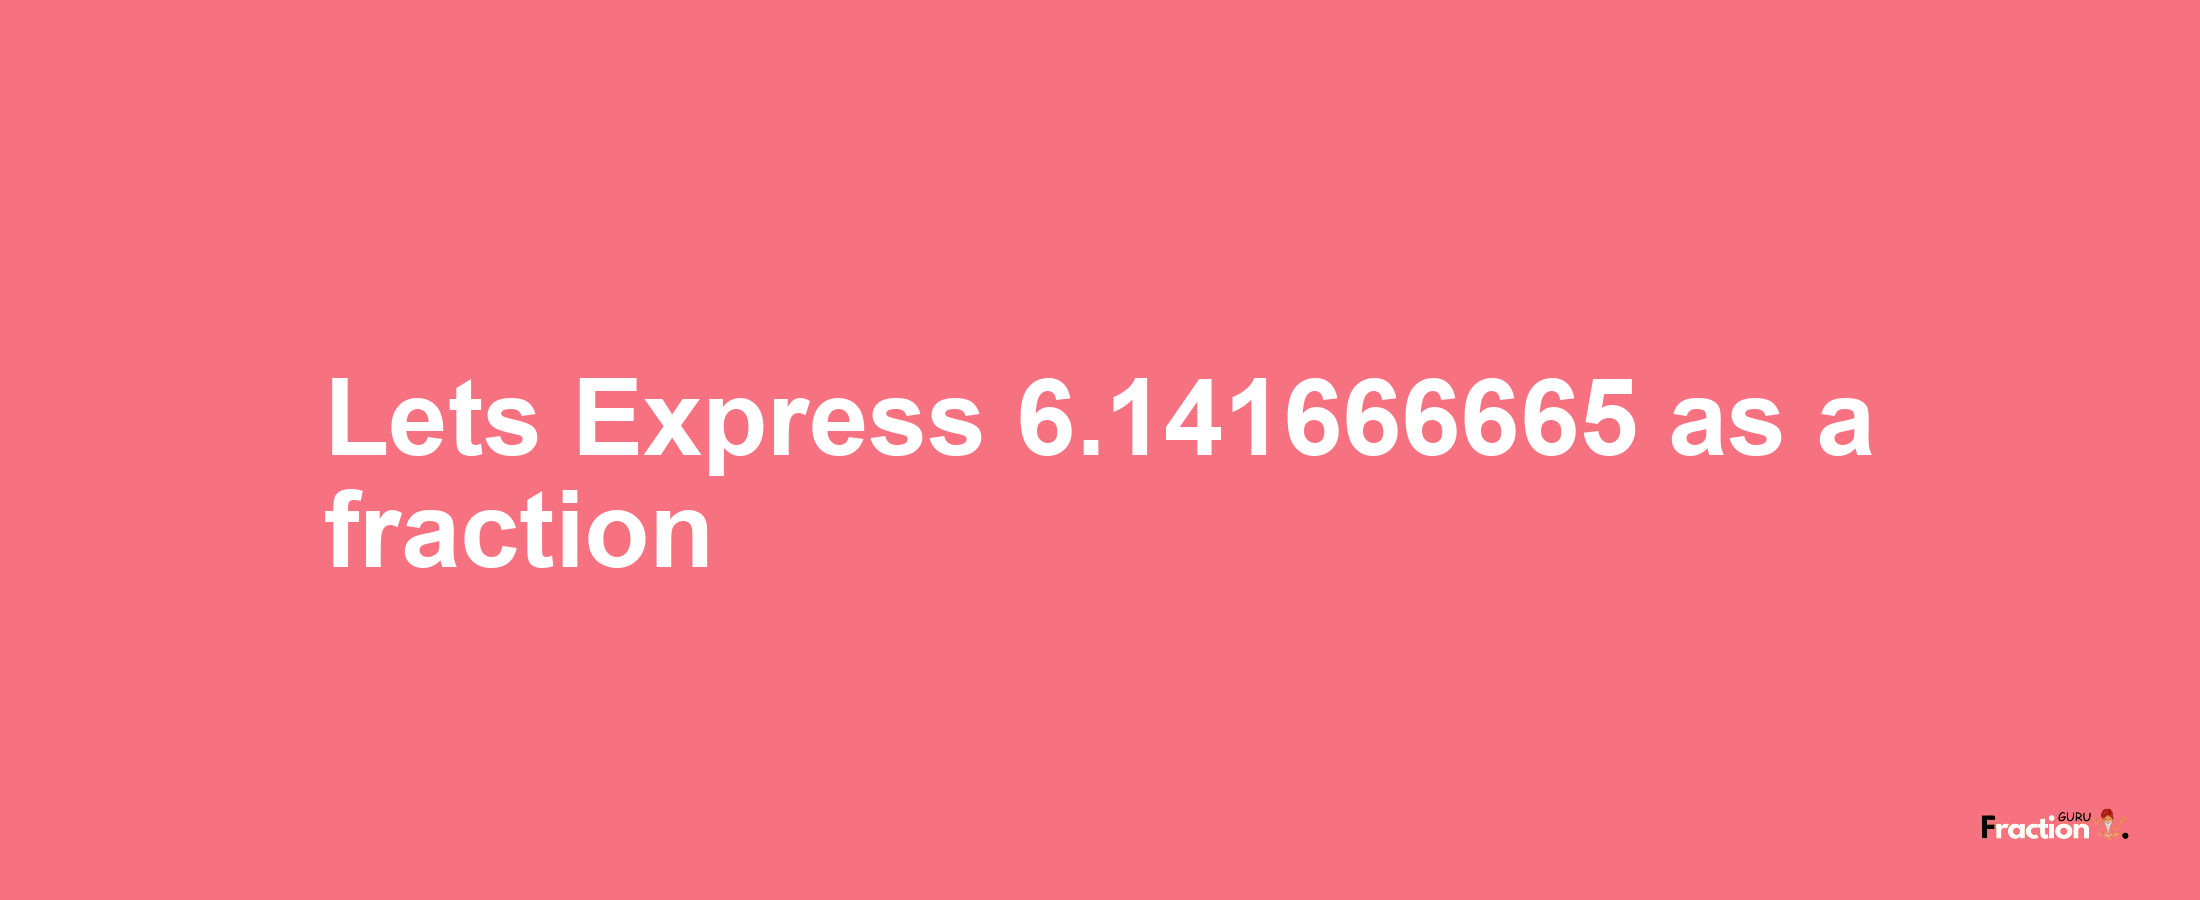 Lets Express 6.141666665 as afraction